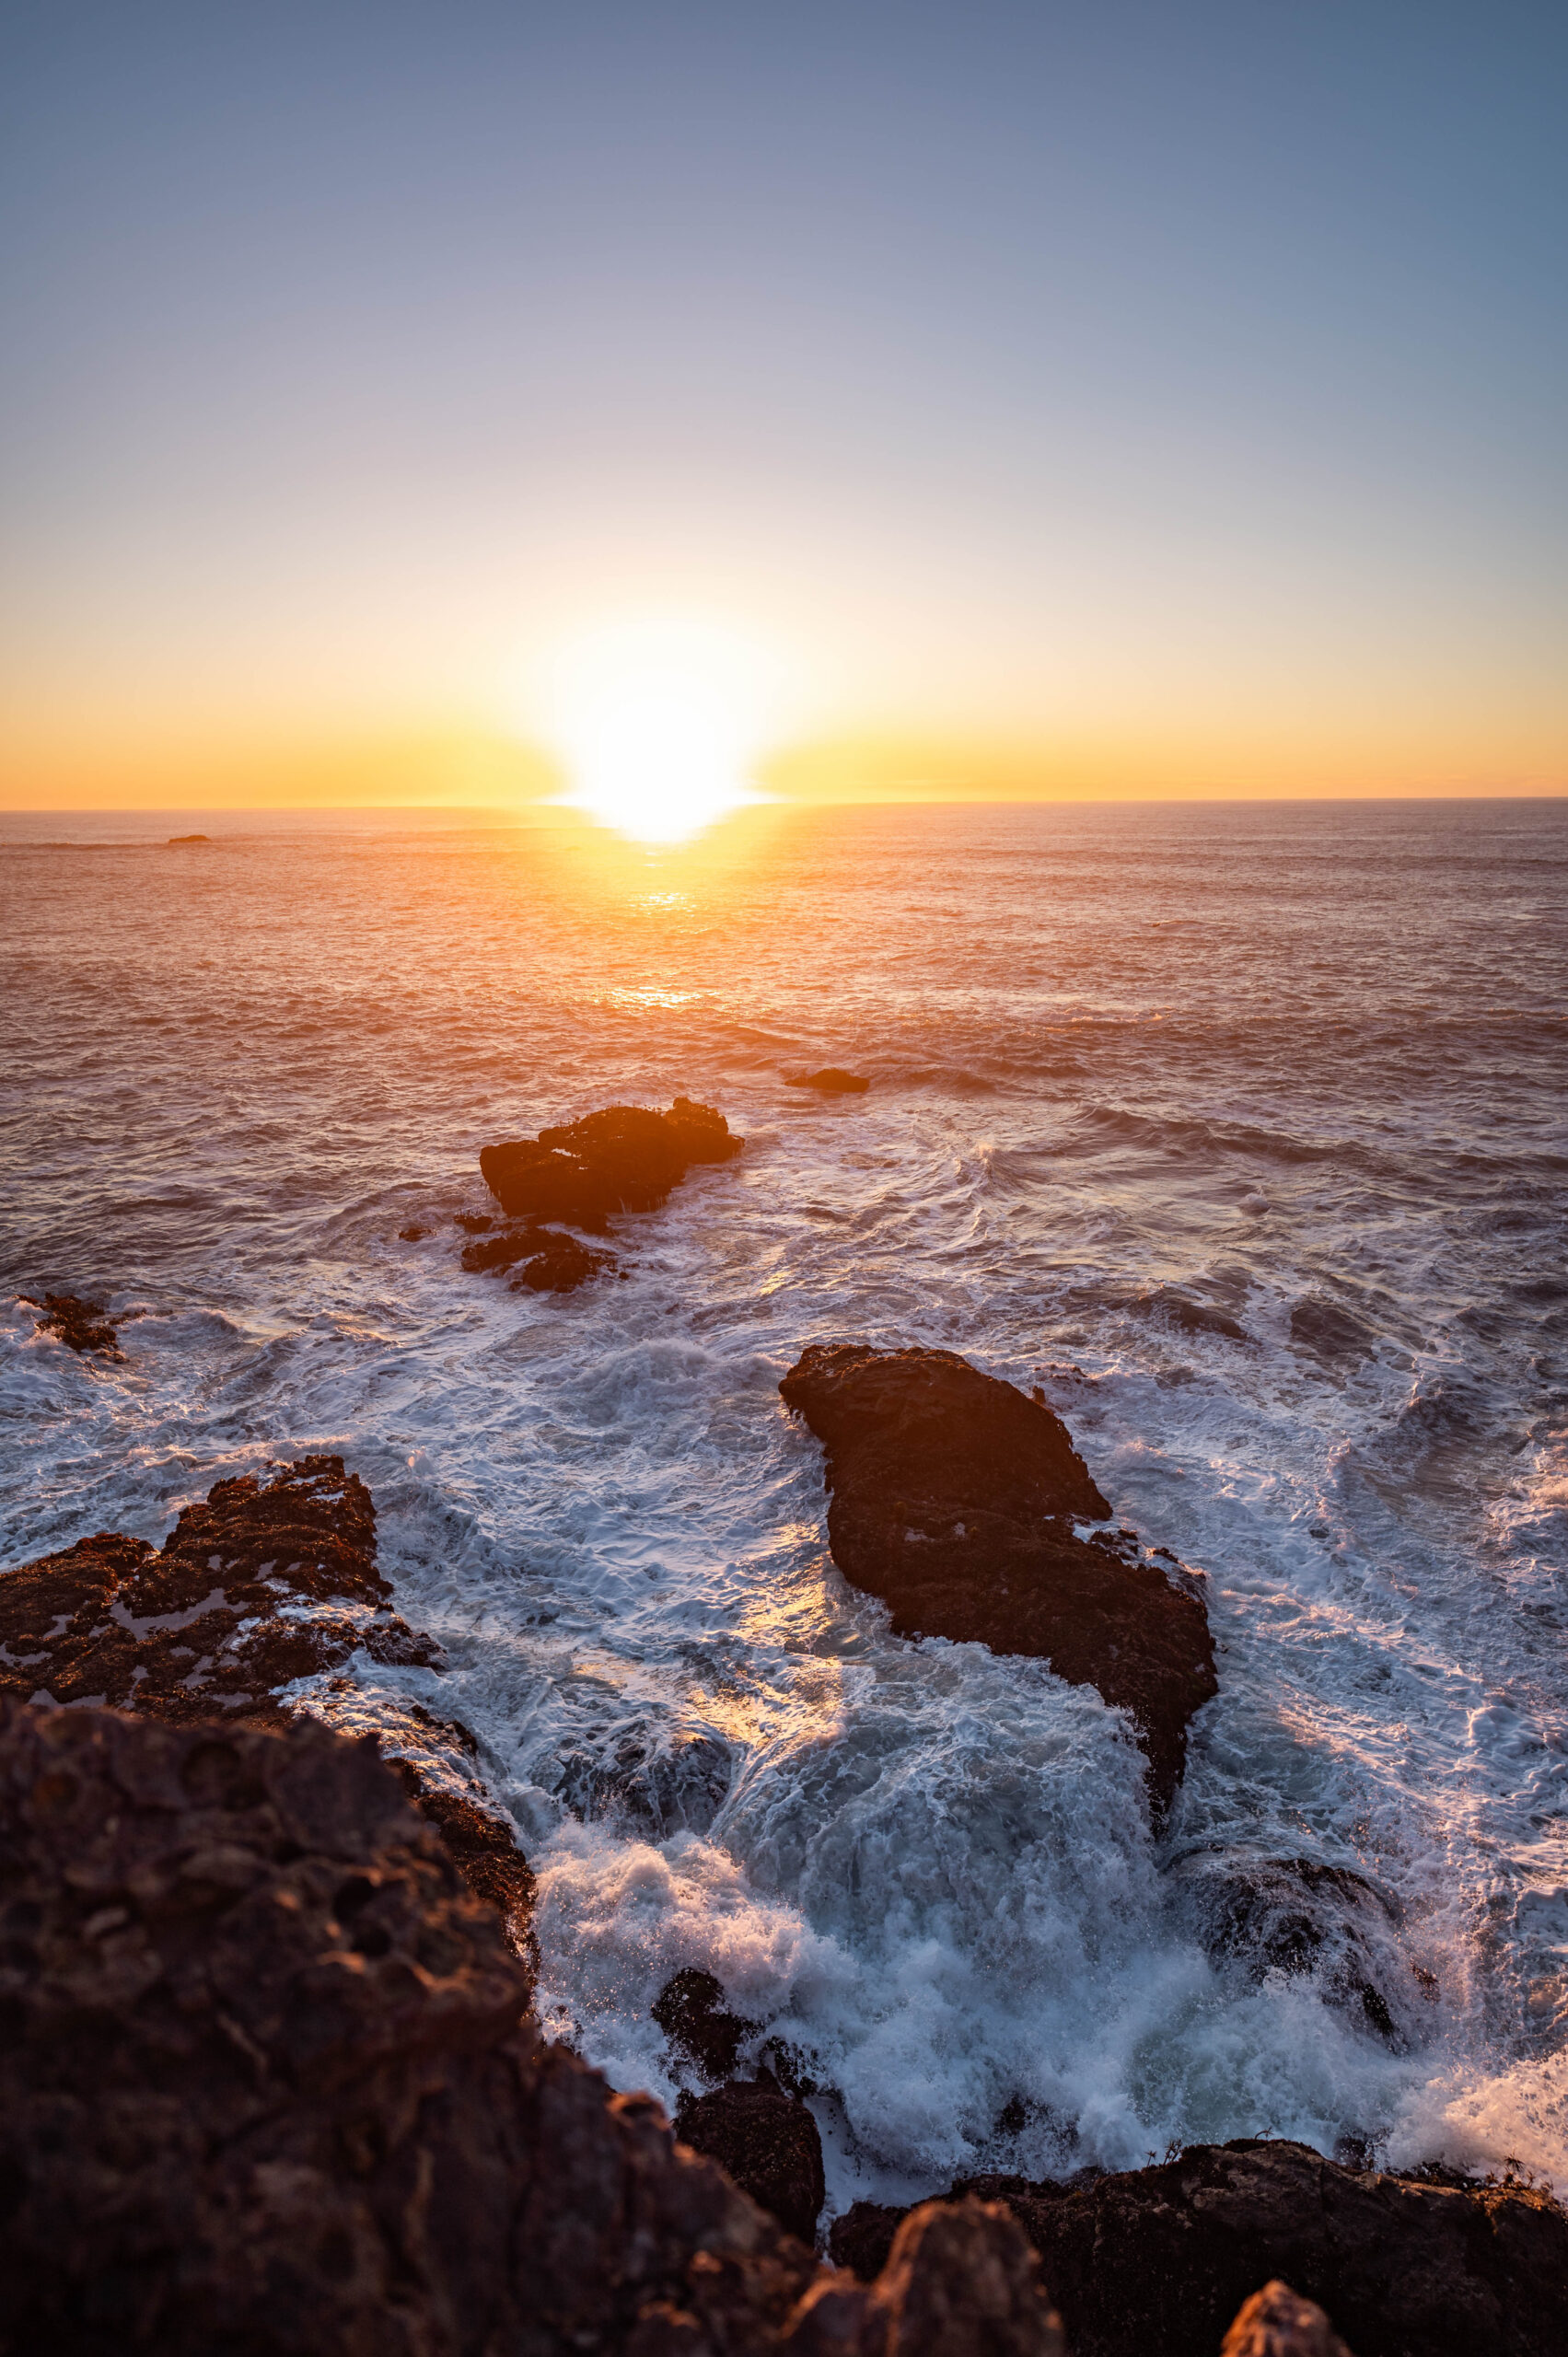 Waves of the Pacific Ocean crashing on the cliffside rocks in Northern California as the sun sets, creating a very orange and glowy image